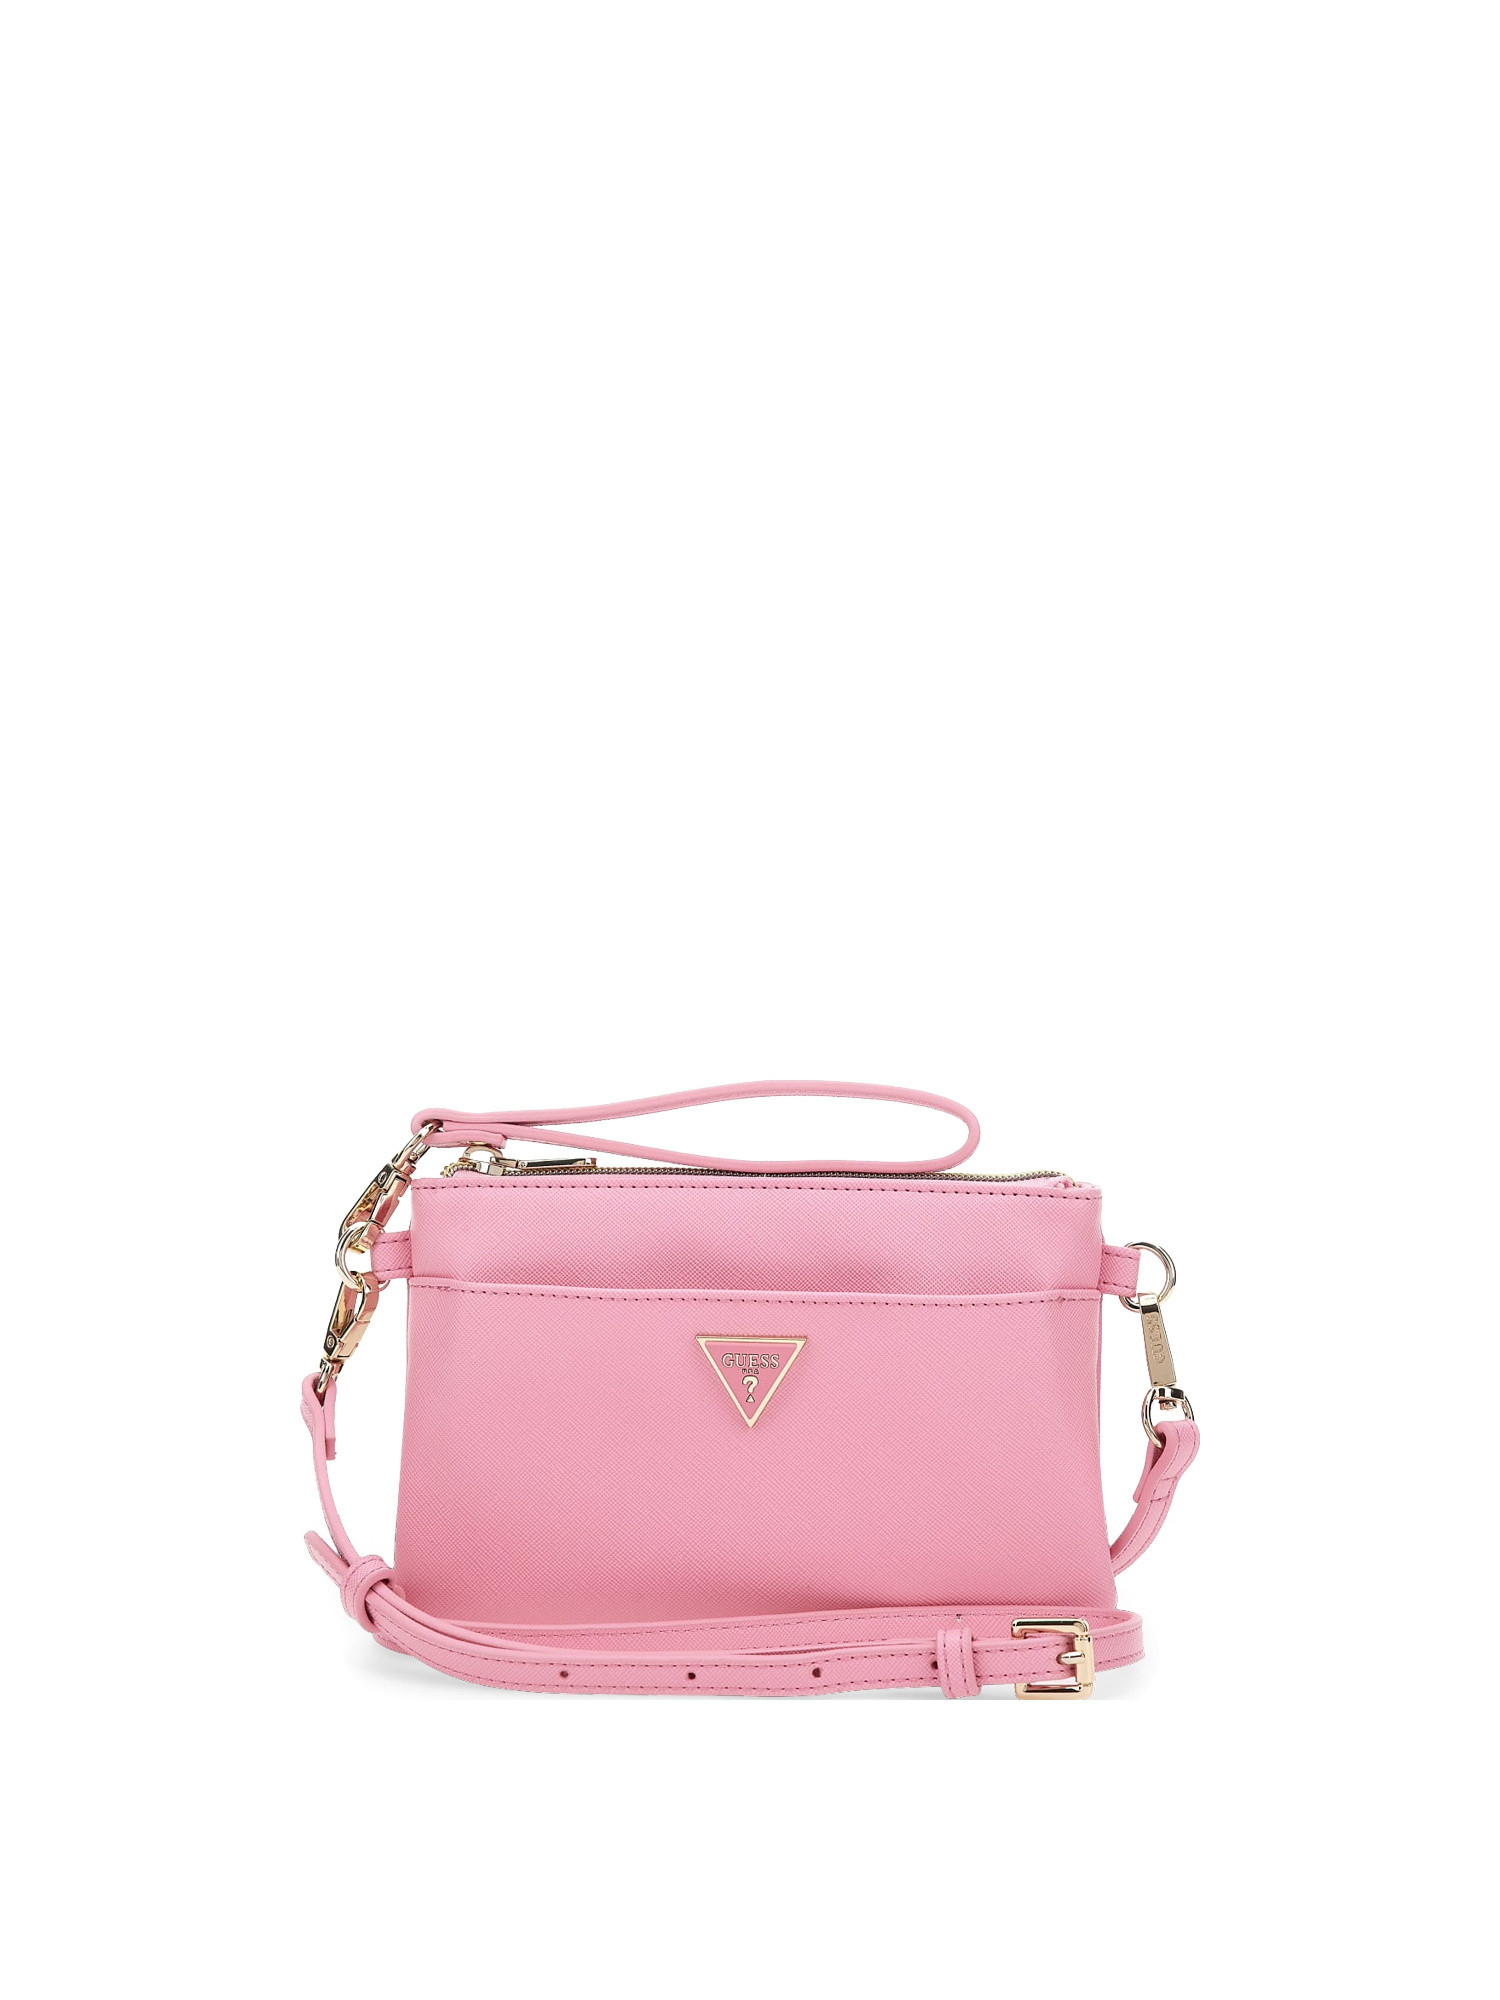 Guess - Pouch con logo, Rosa, large image number 0